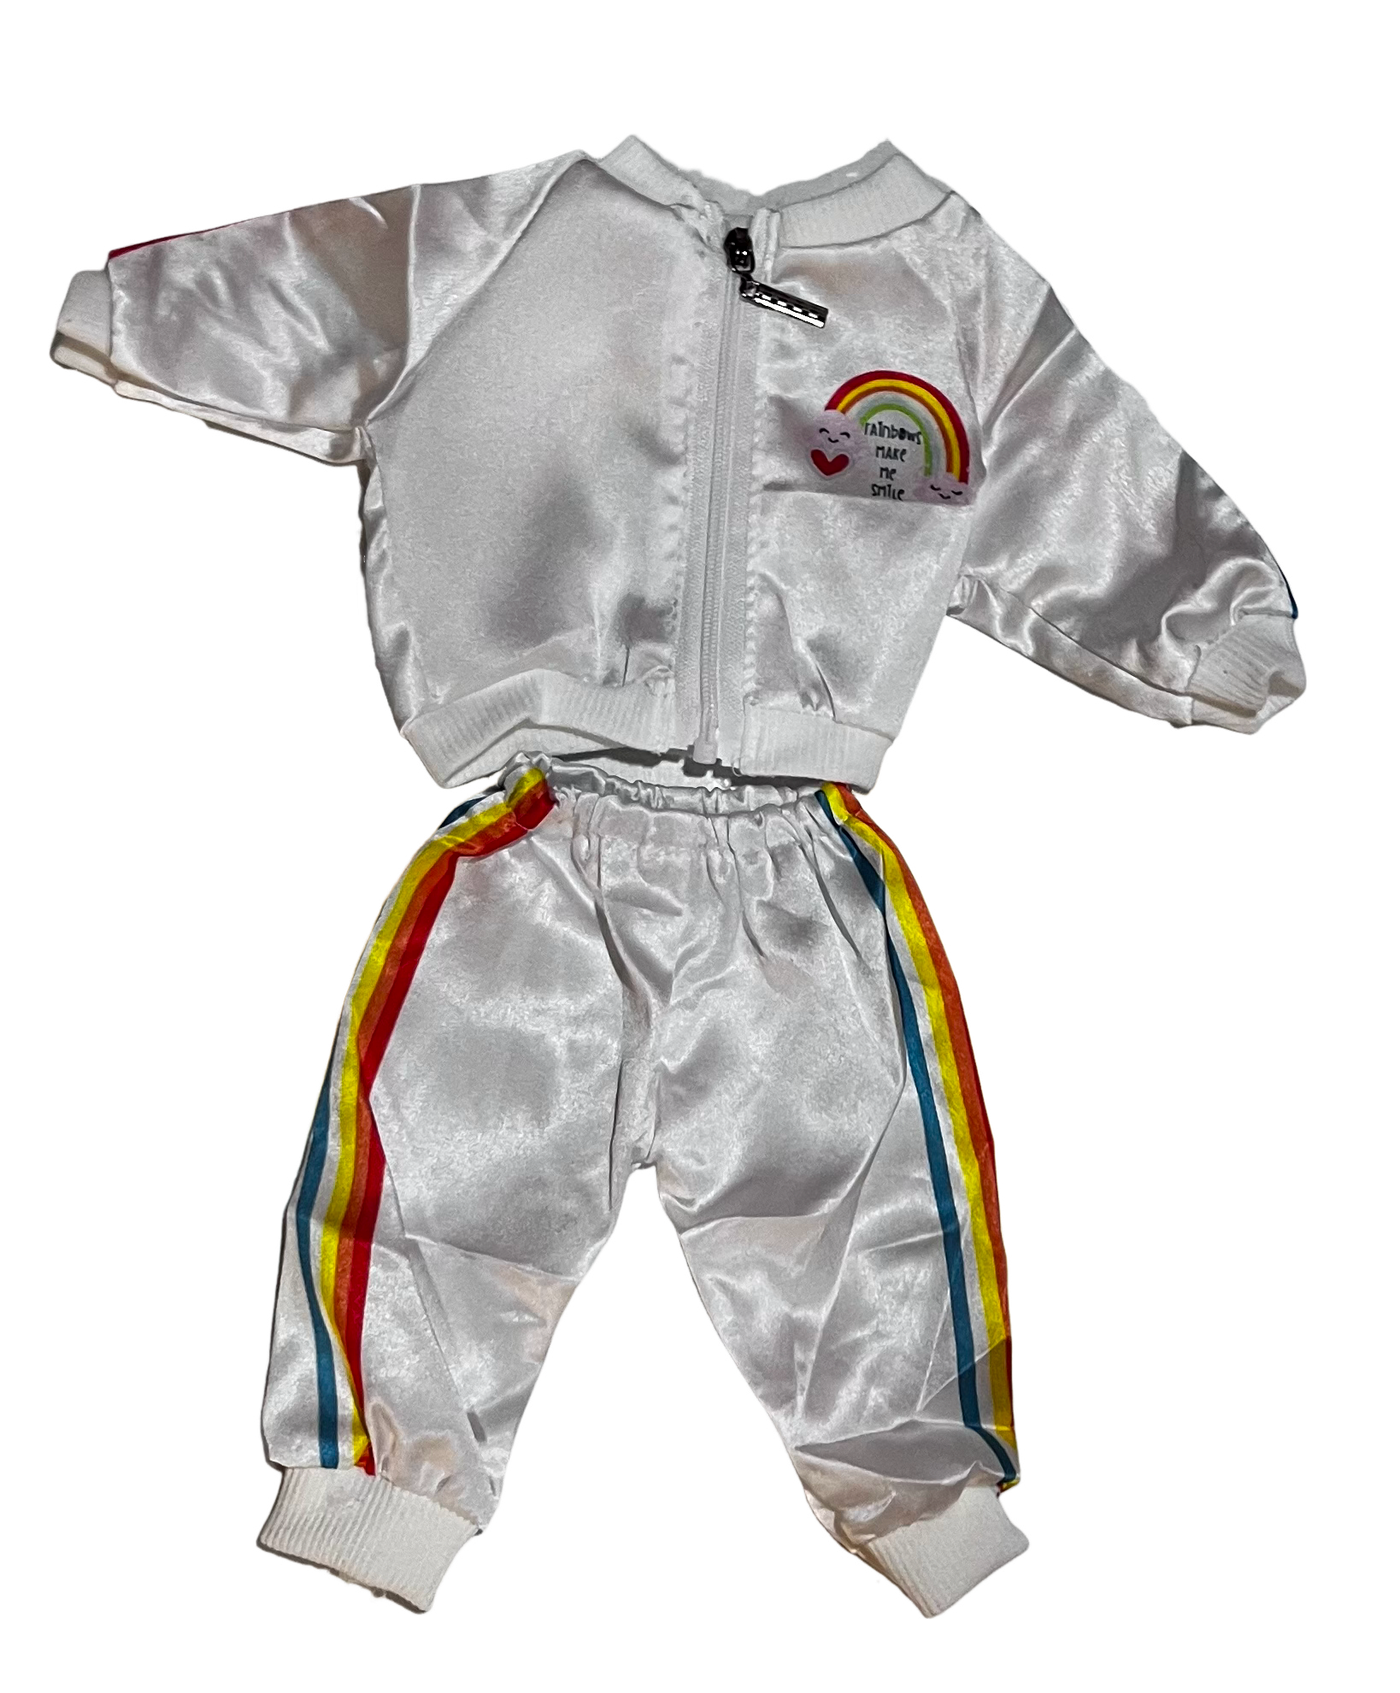 Doll Rainbow Leisure Outfit - 18"